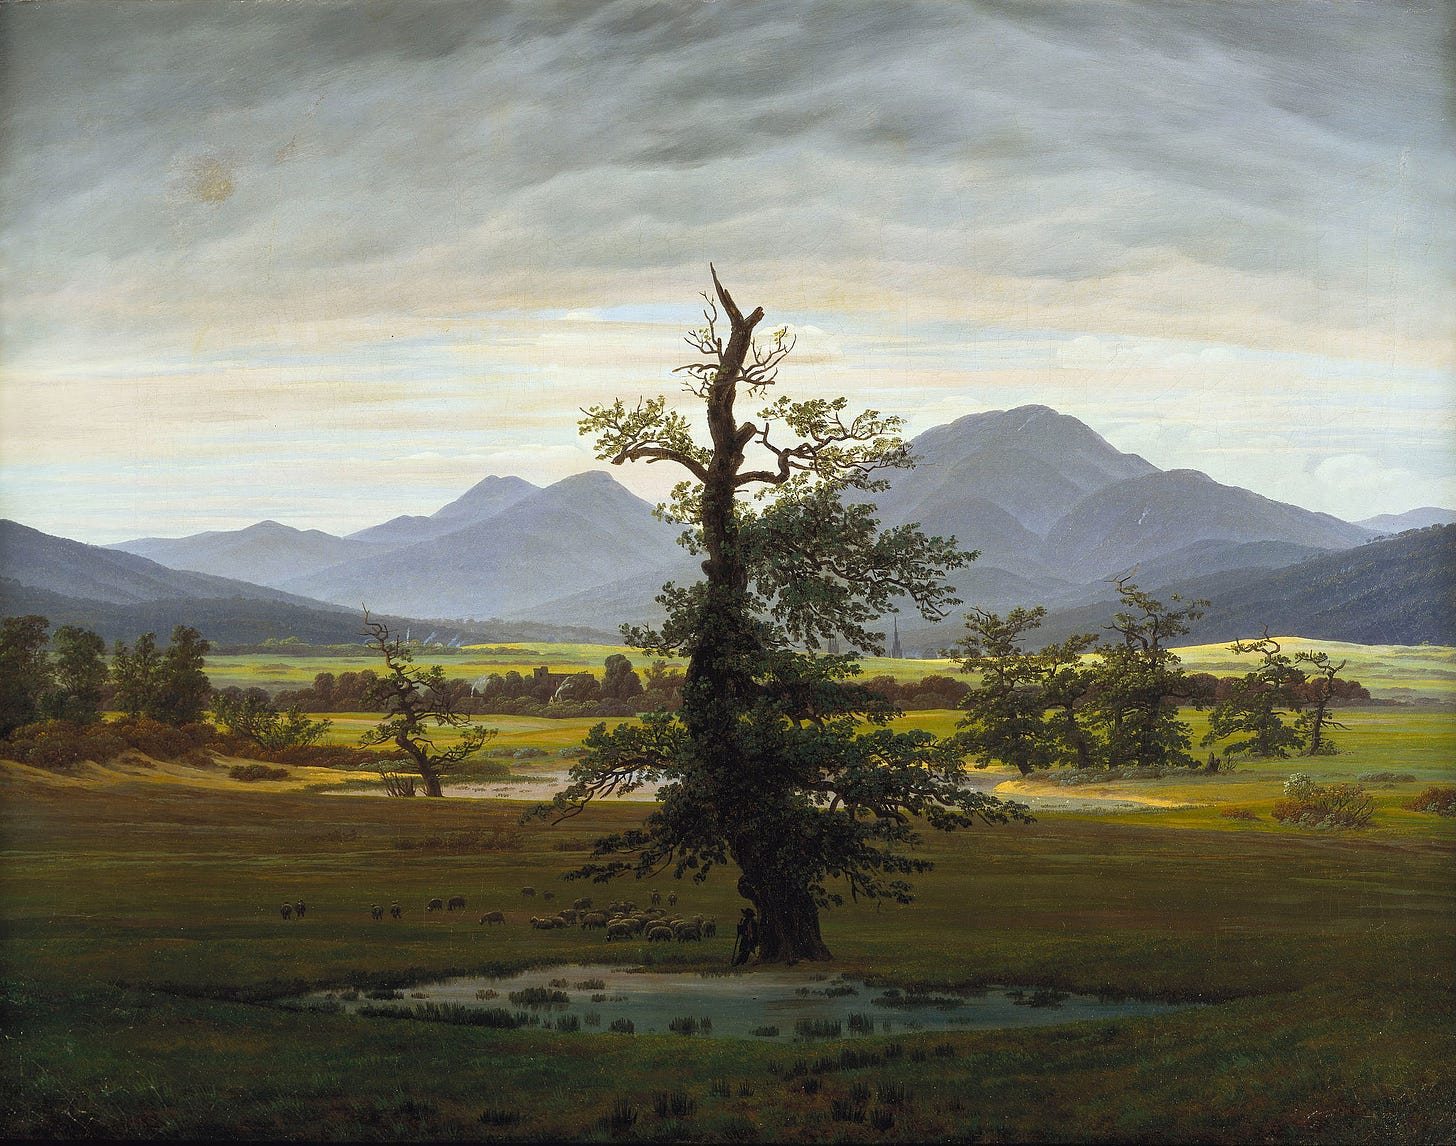 Painting of a natural landscape, with one lonely tree at its center and other trees, as well as a pond and a mountain range, visible in the distance